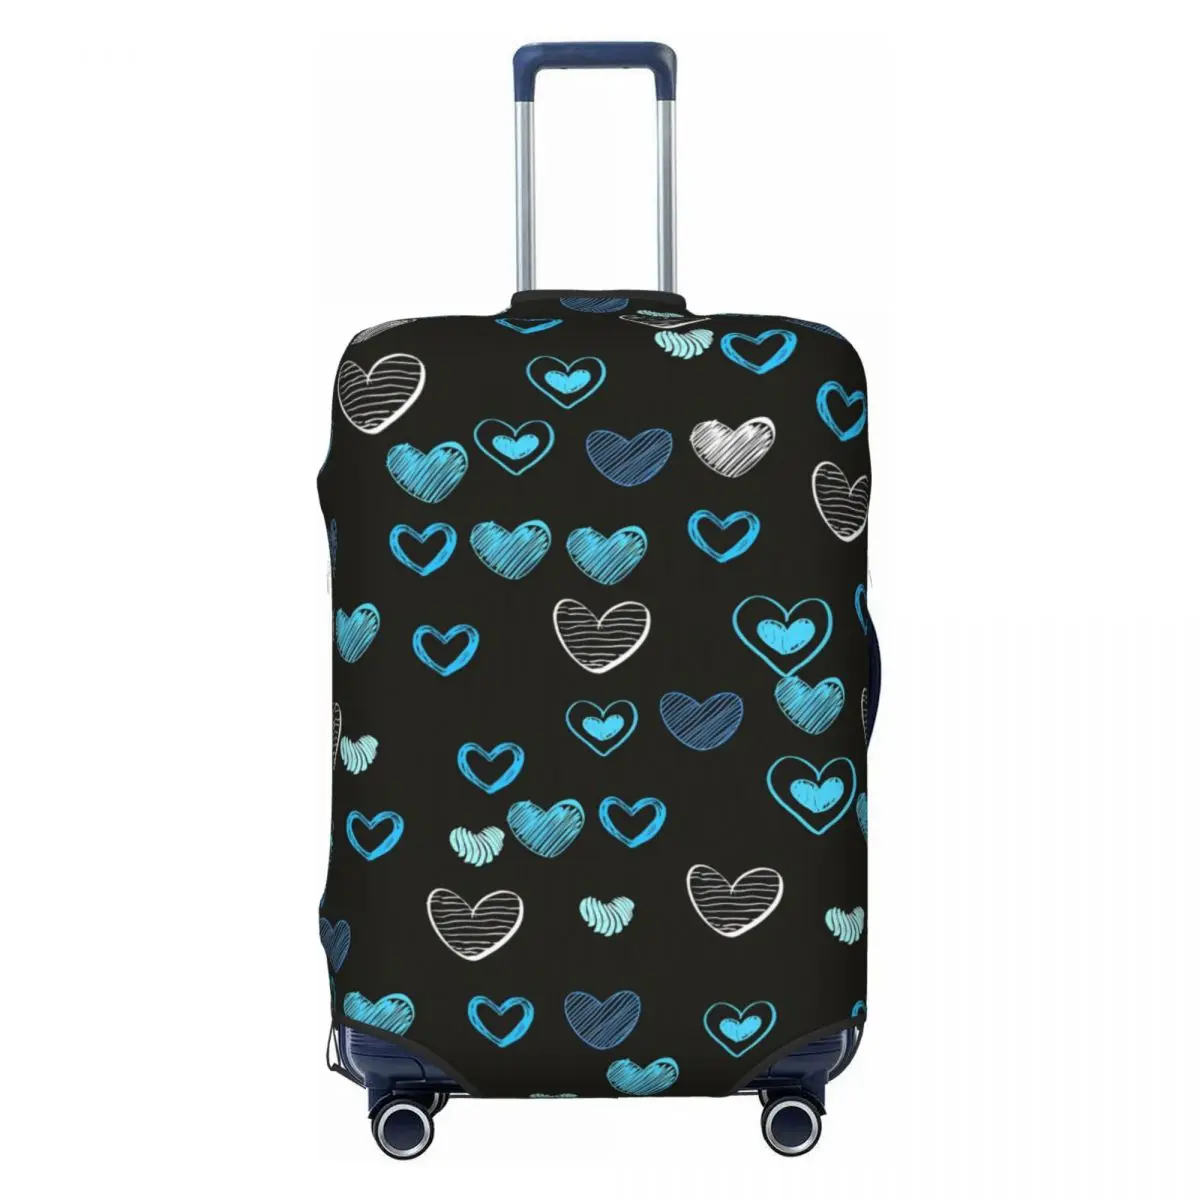 

Blue Hearts Suitcase Cover Cute Heart Print Strectch Cruise Trip Protector Luggage Accesories Vacation